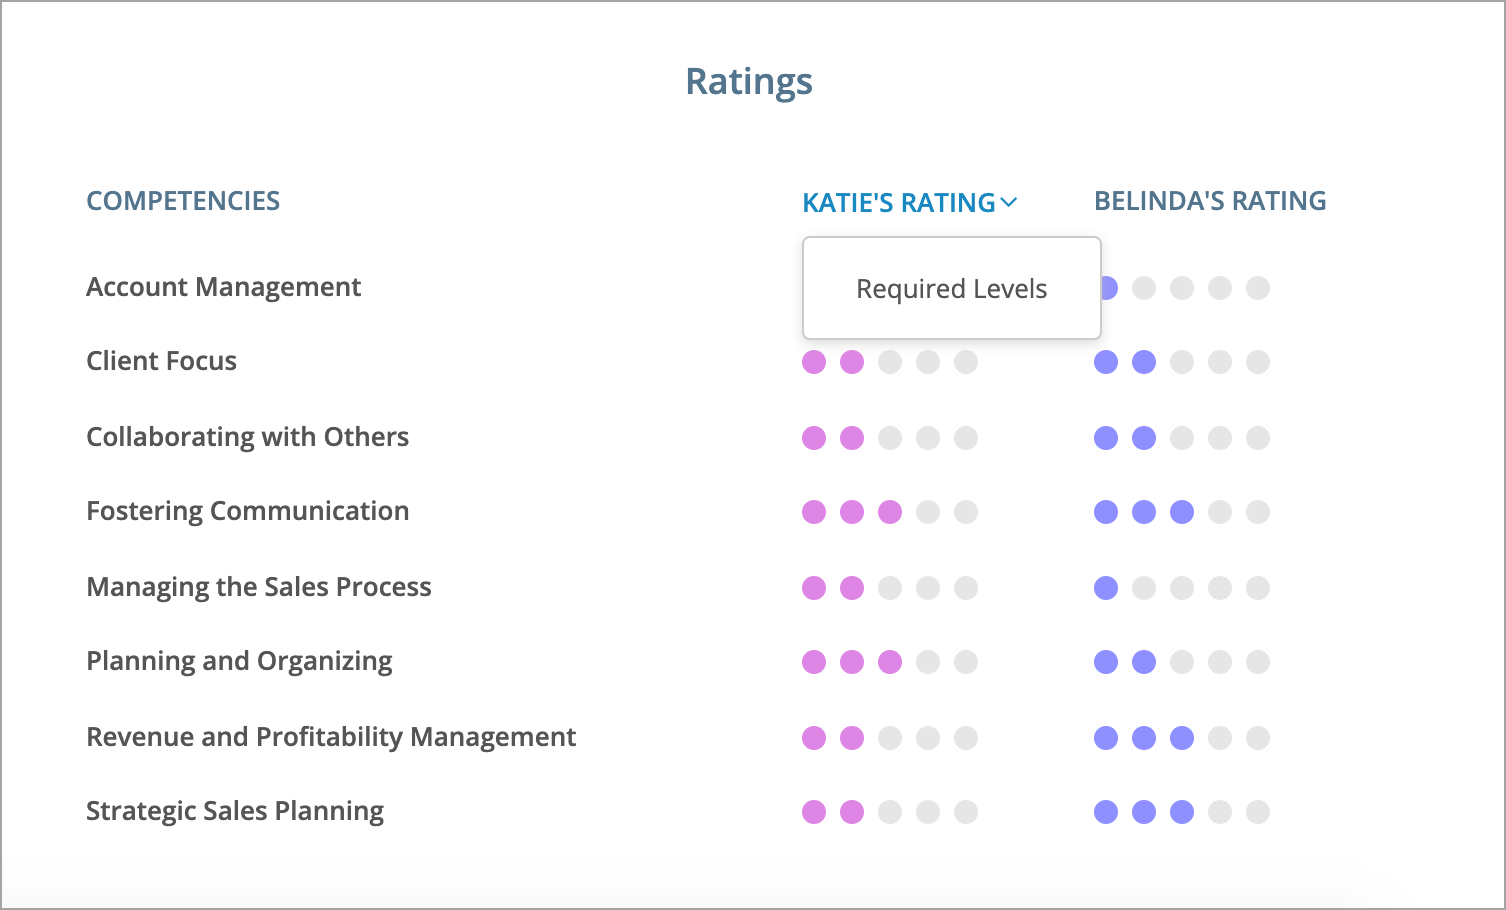 Comparing the manager's ratings with the employee's ratings